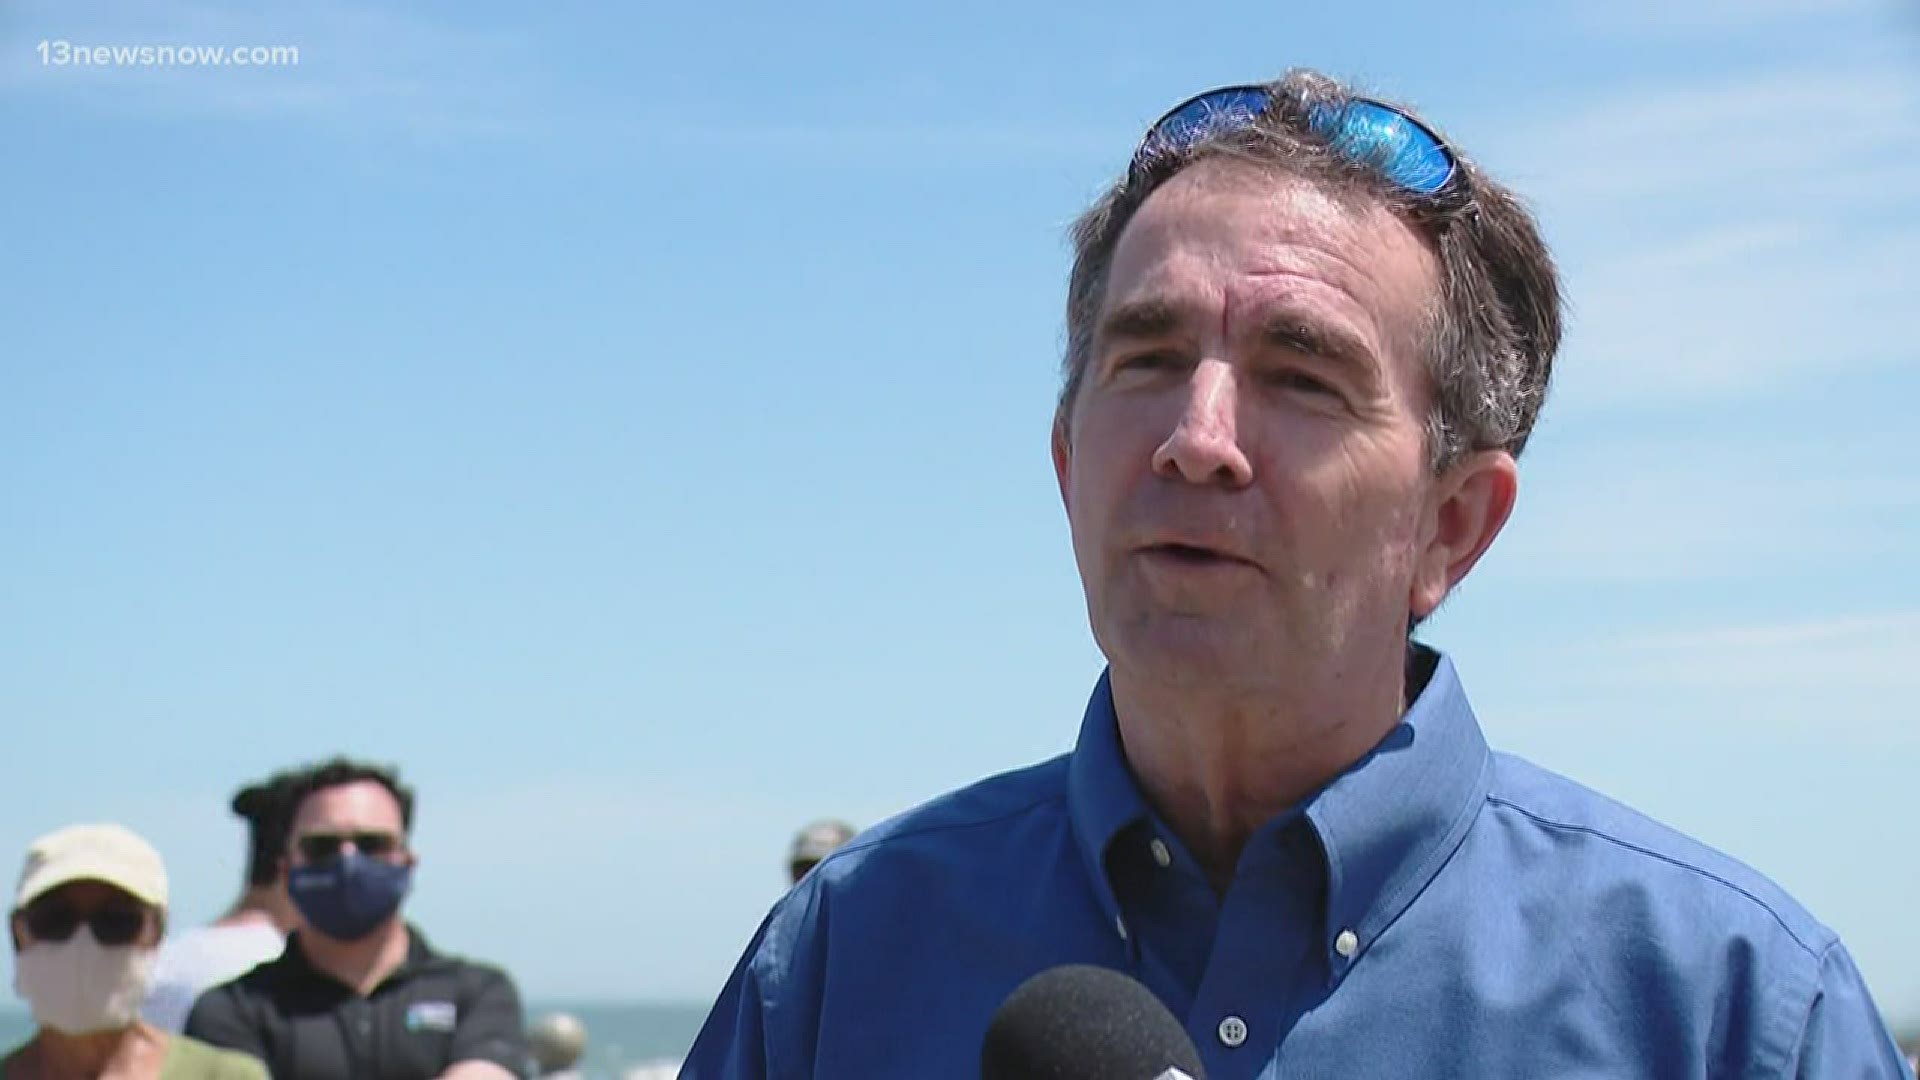 Northam has said Virginia Beach is considered a test before other Hampton Roads beaches can reopen.